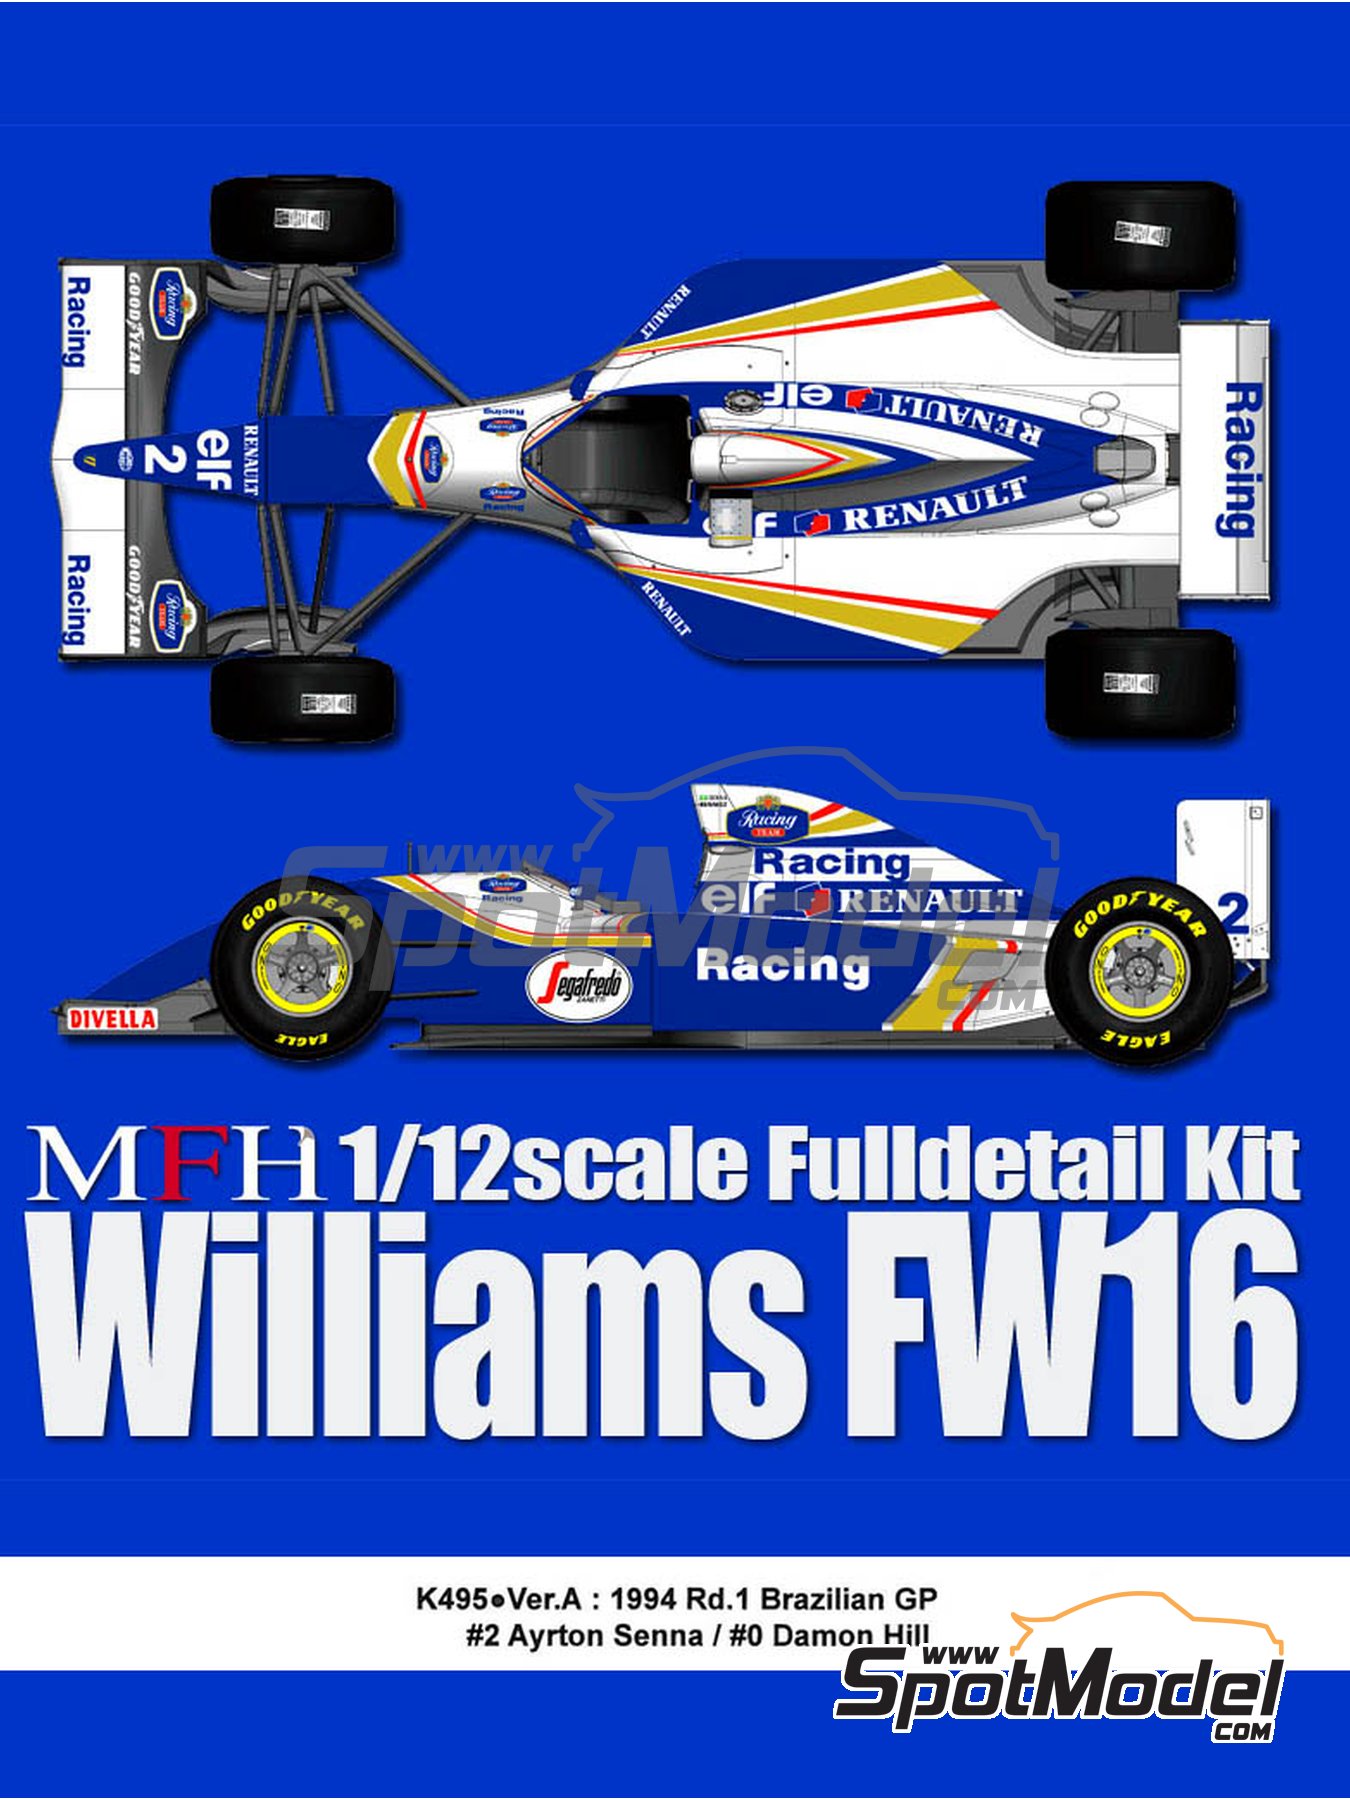 DECALS Damon Hill 1994 Williams FW16 ROTHMANS 1:43 Formula 1 Car Collections